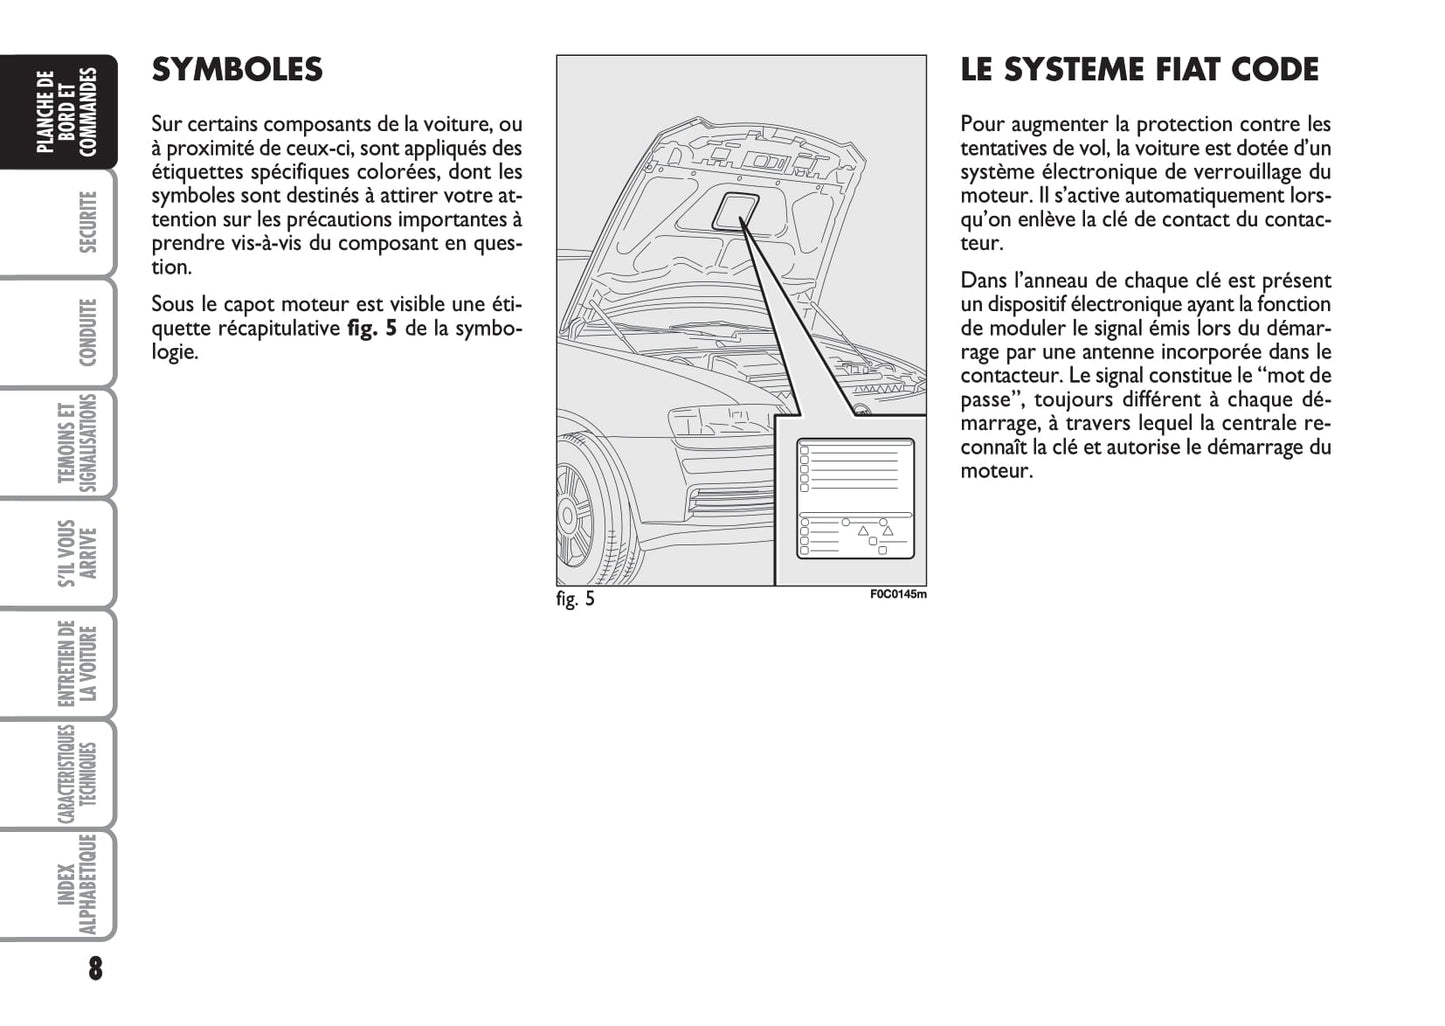 2006-2007 Fiat Stilo Owner's Manual | French